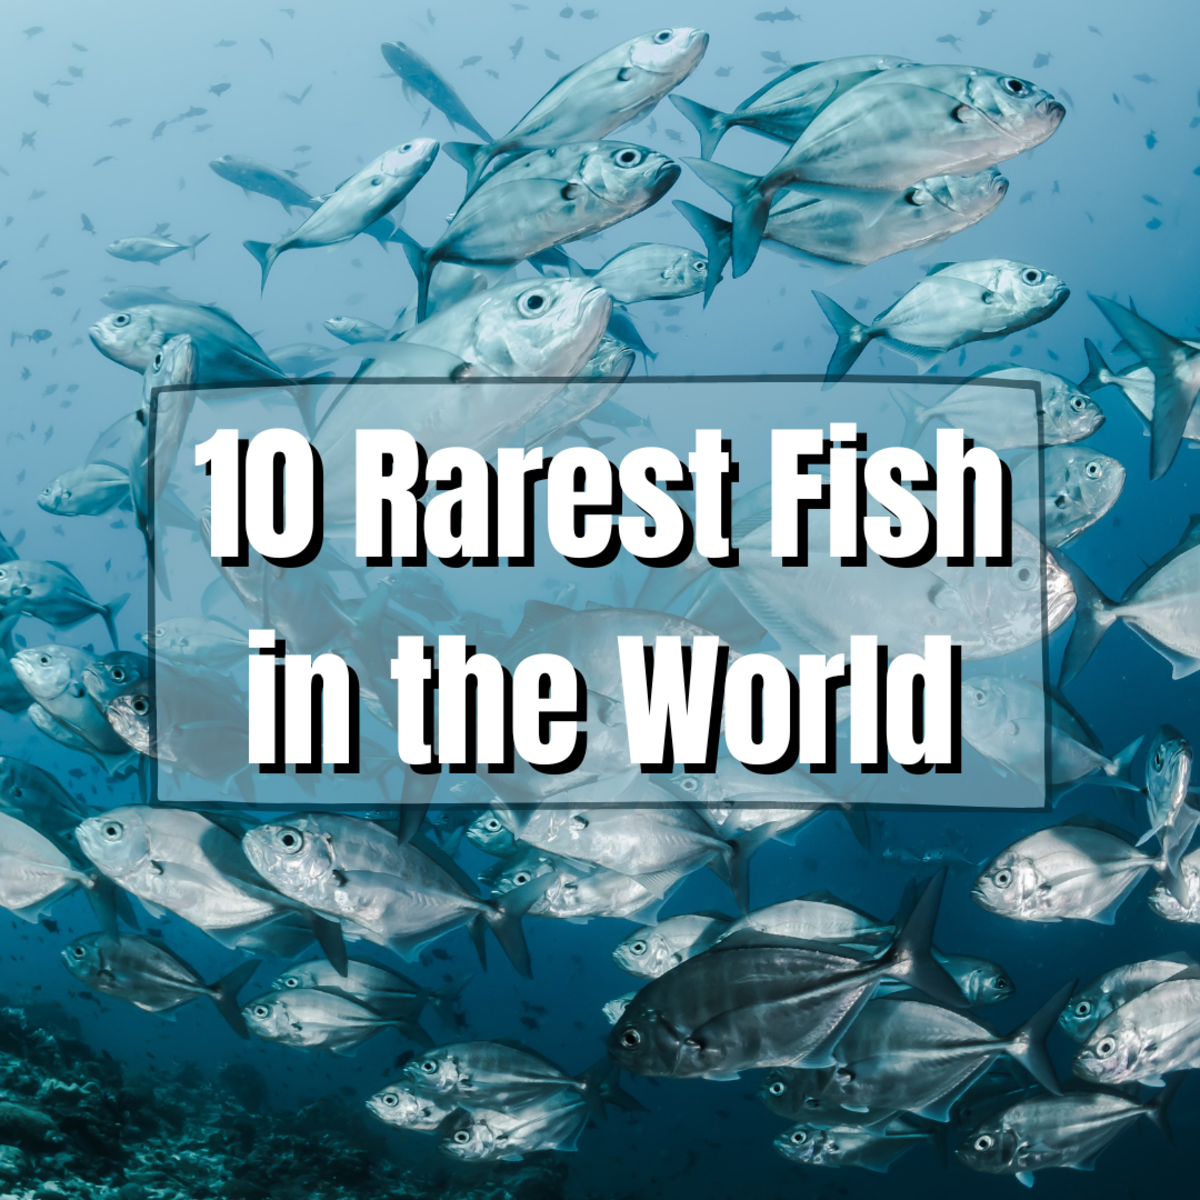 Read on to learn about the 10 rarest fish in the world, including the Tequila splitfin and the incredibly elusive ornate sleeper ray.